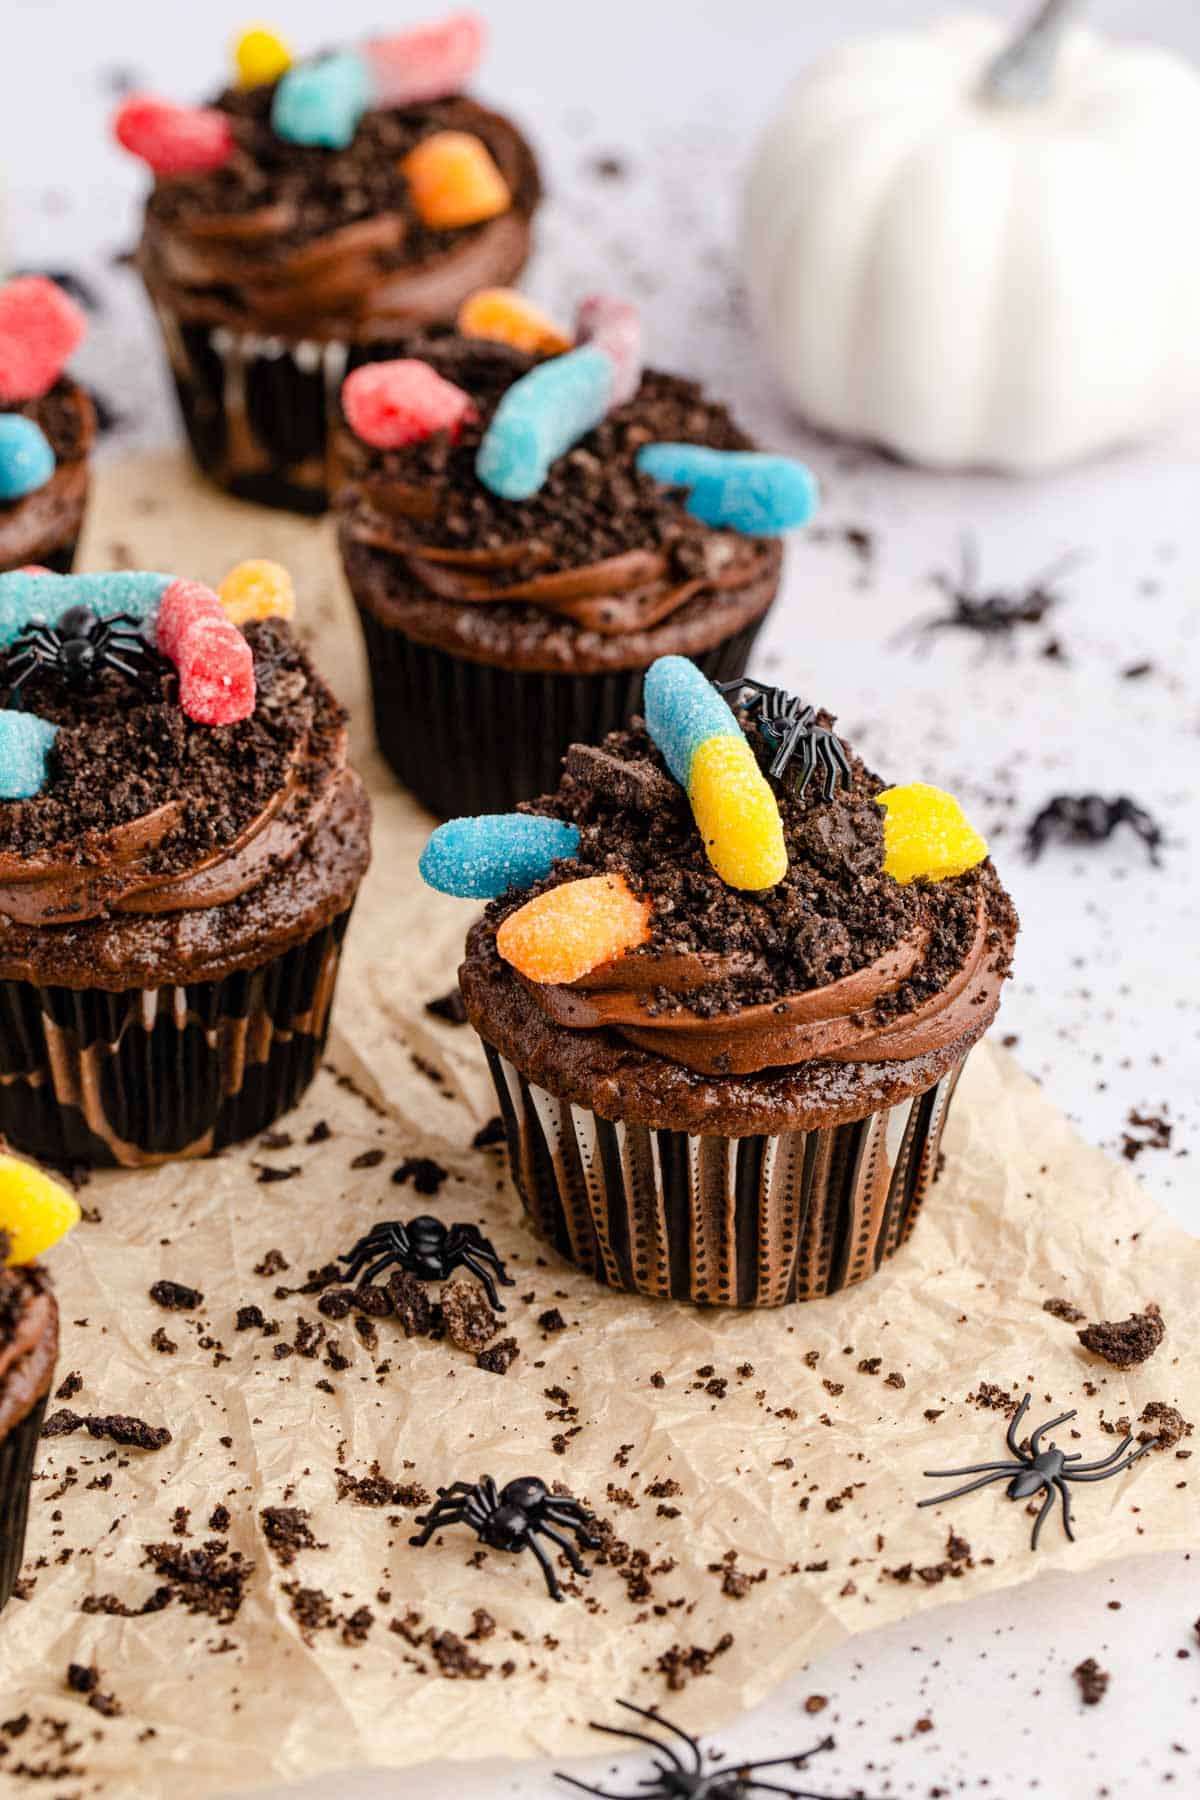 Gummy worm dirt cupcakes with a white pumpkin in the background.